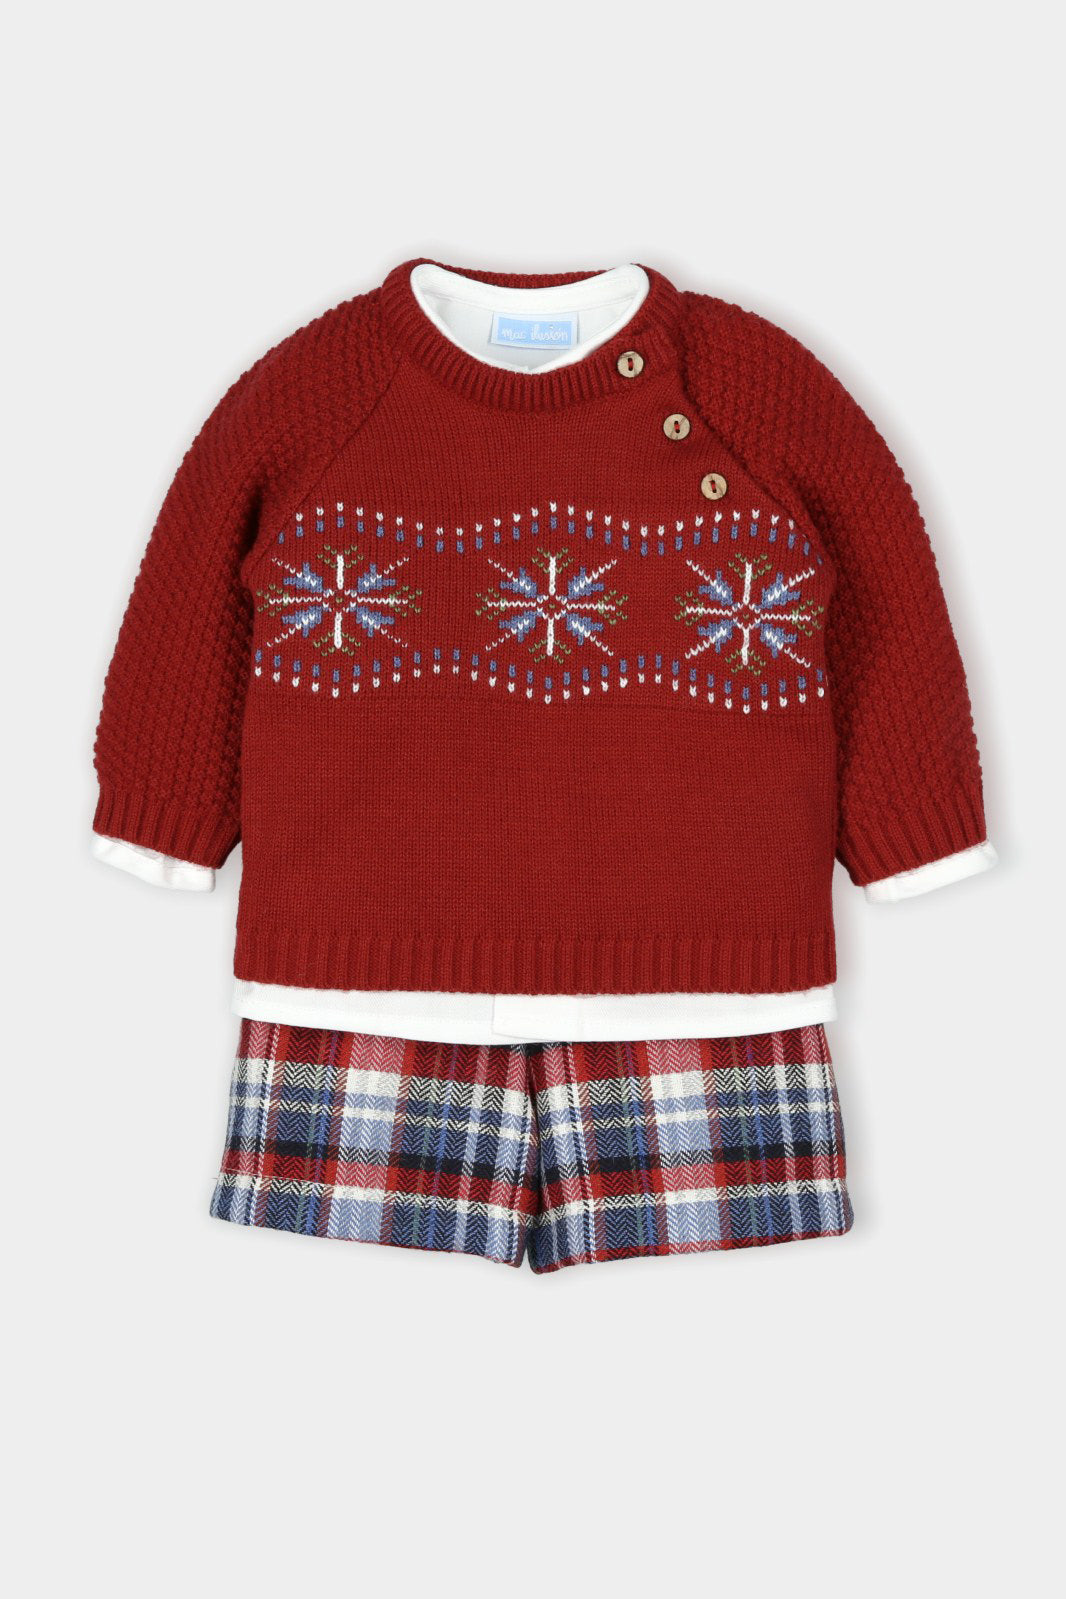 Mac Ilusión PREORDER "Horace" Burgundy Knitted Tartan Outfit Set | Millie and John